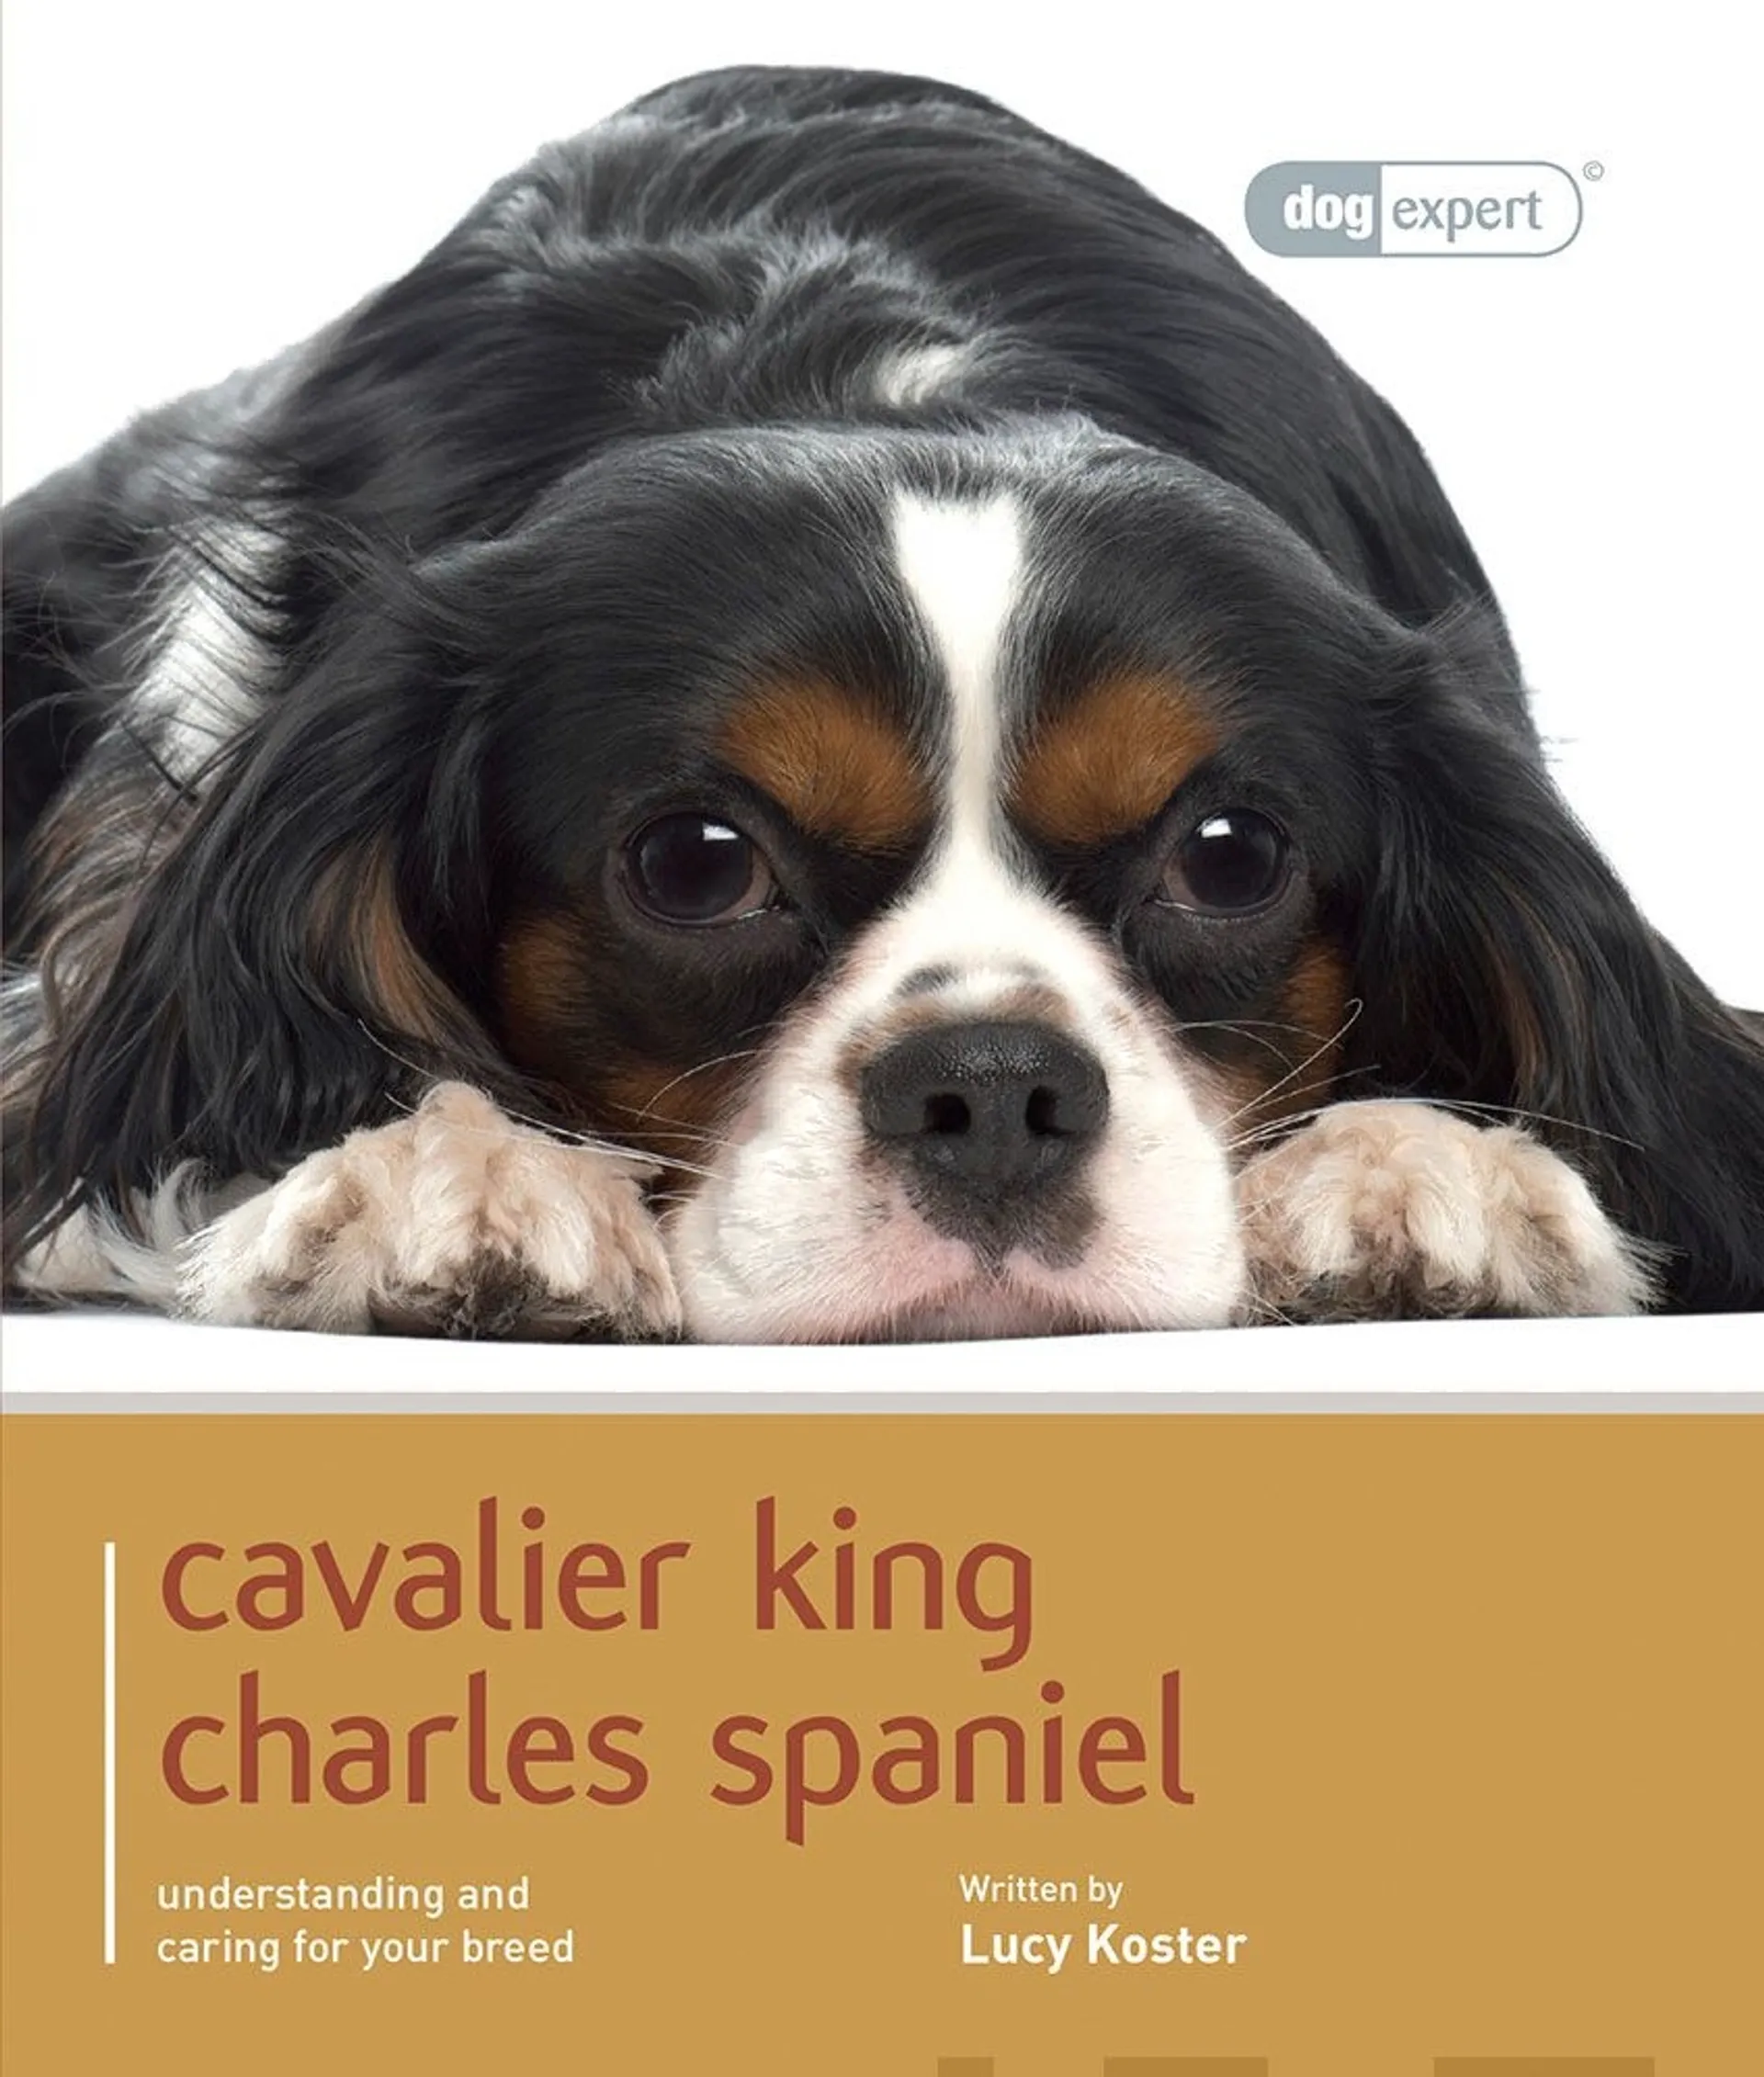 Koster, Cavalier King Charles Spaniel - Understanding and caring for your breed